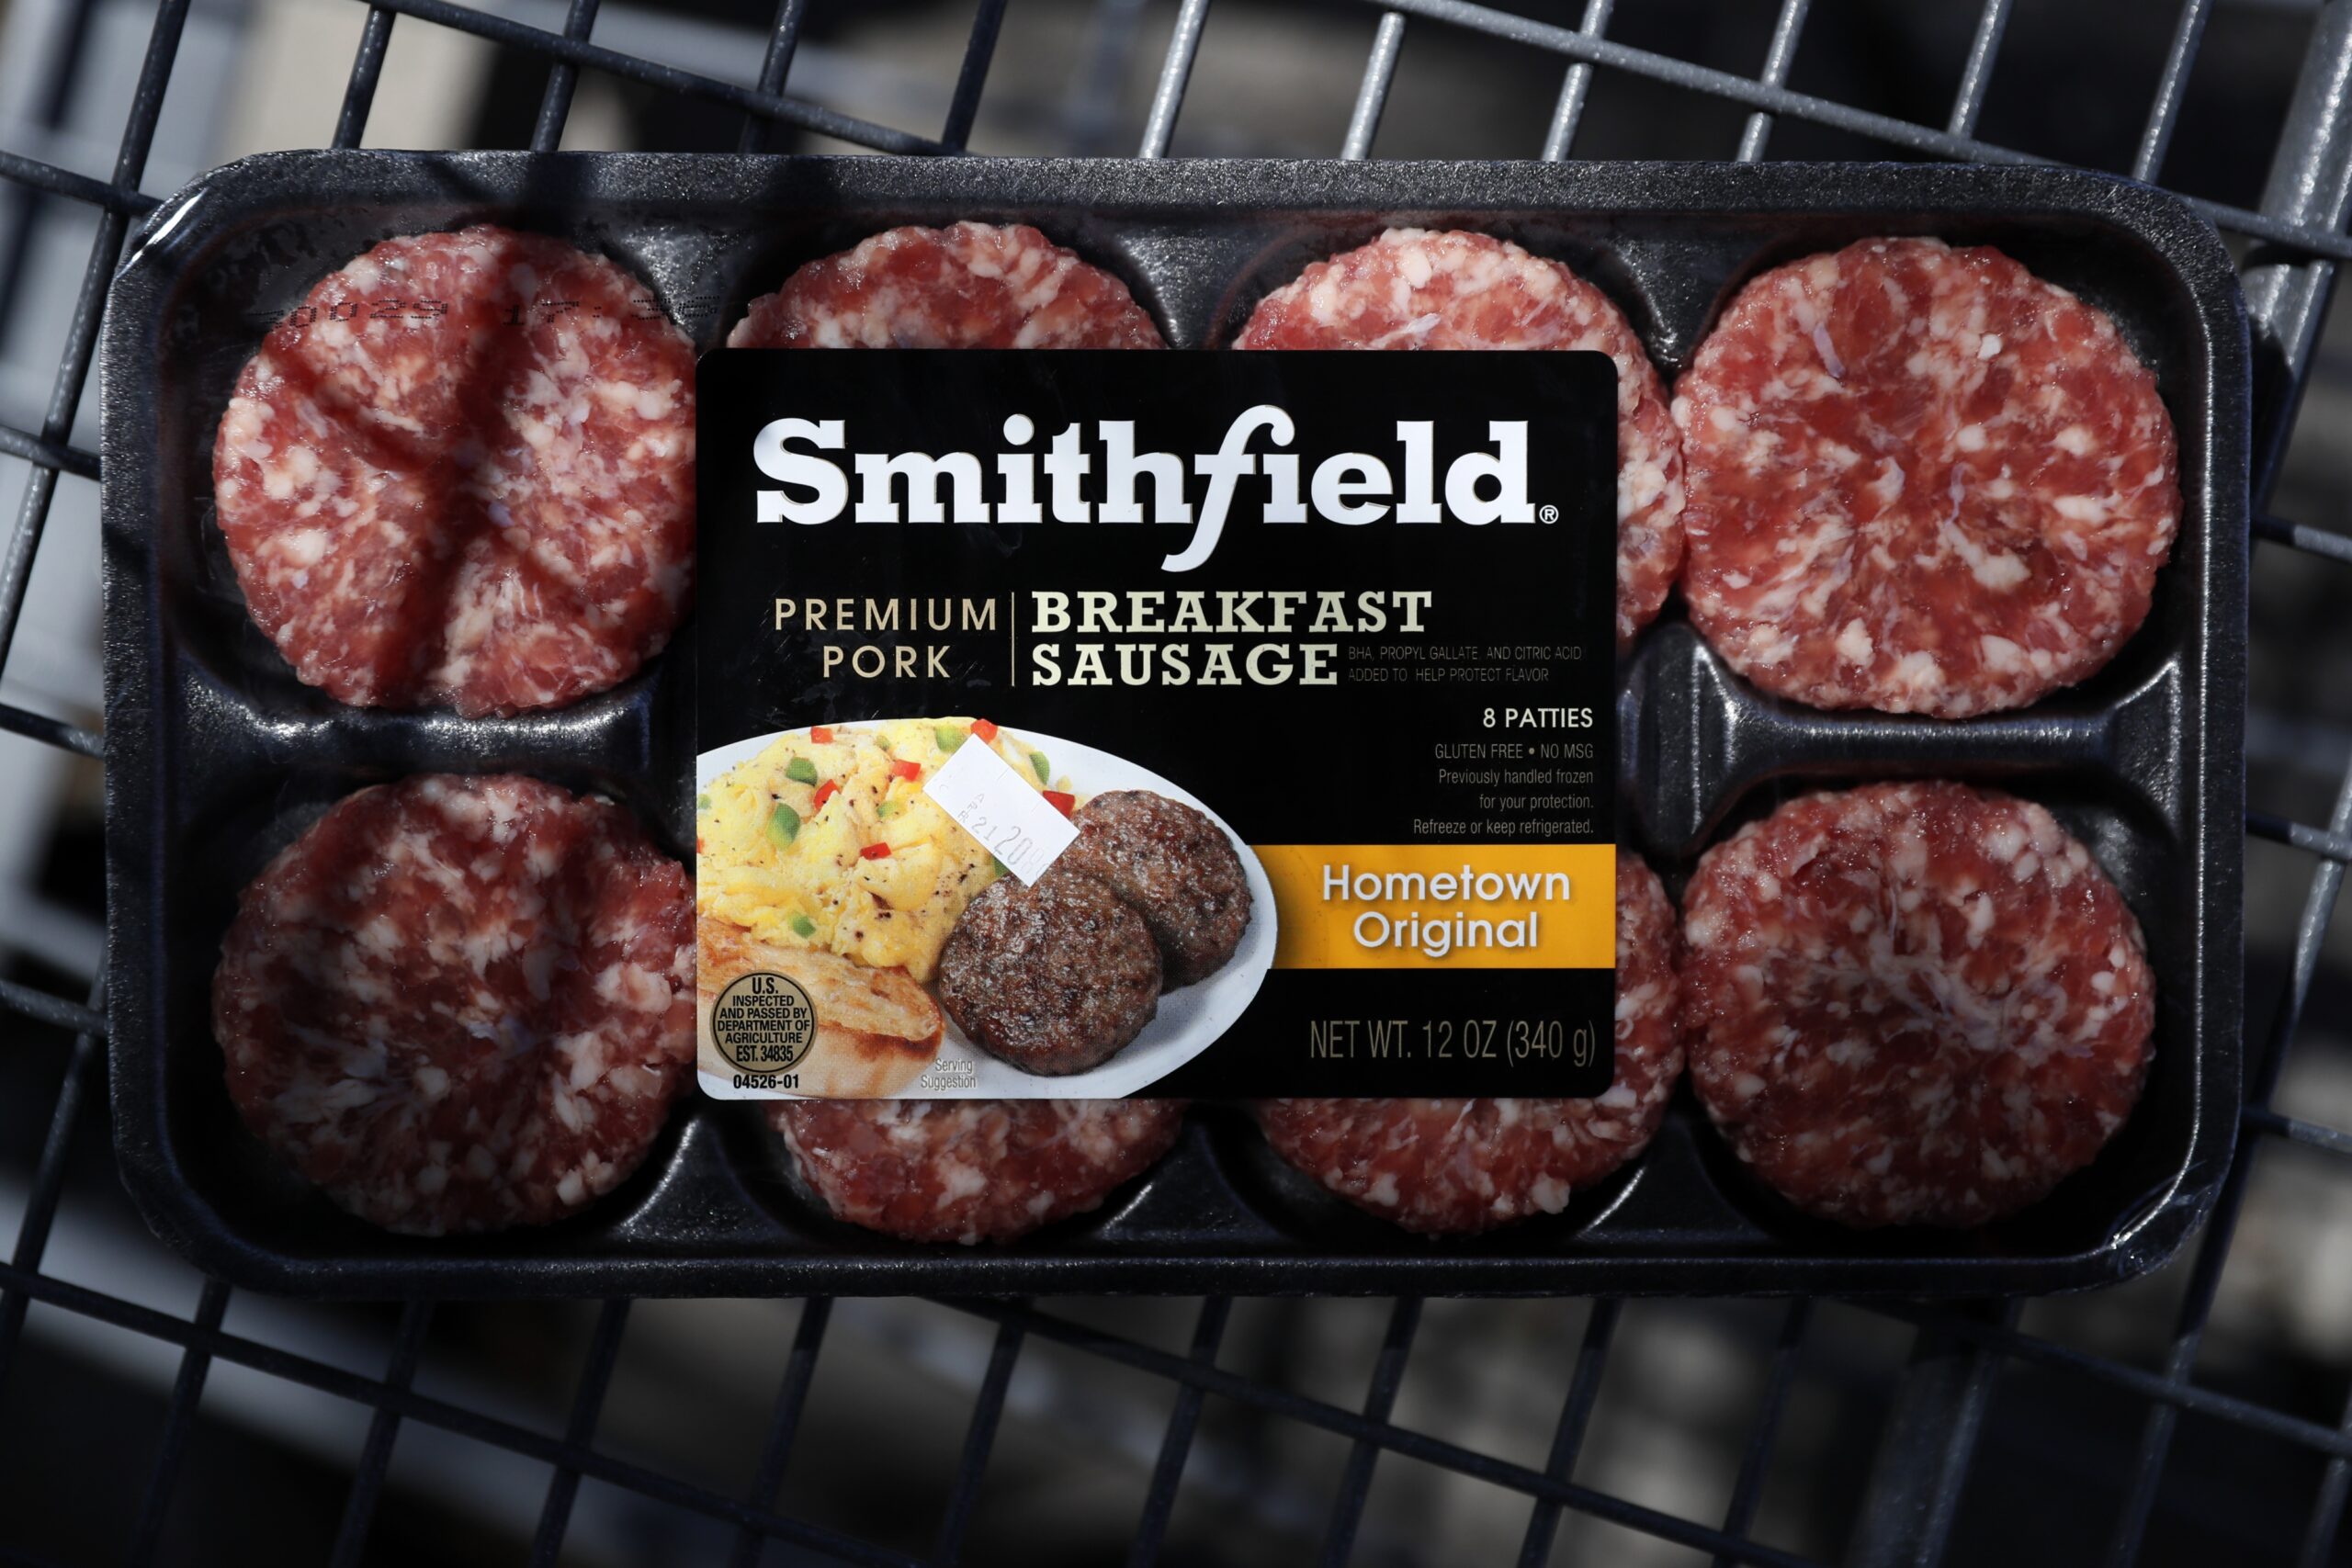 A package of Smithfield Foods breakfast sausage